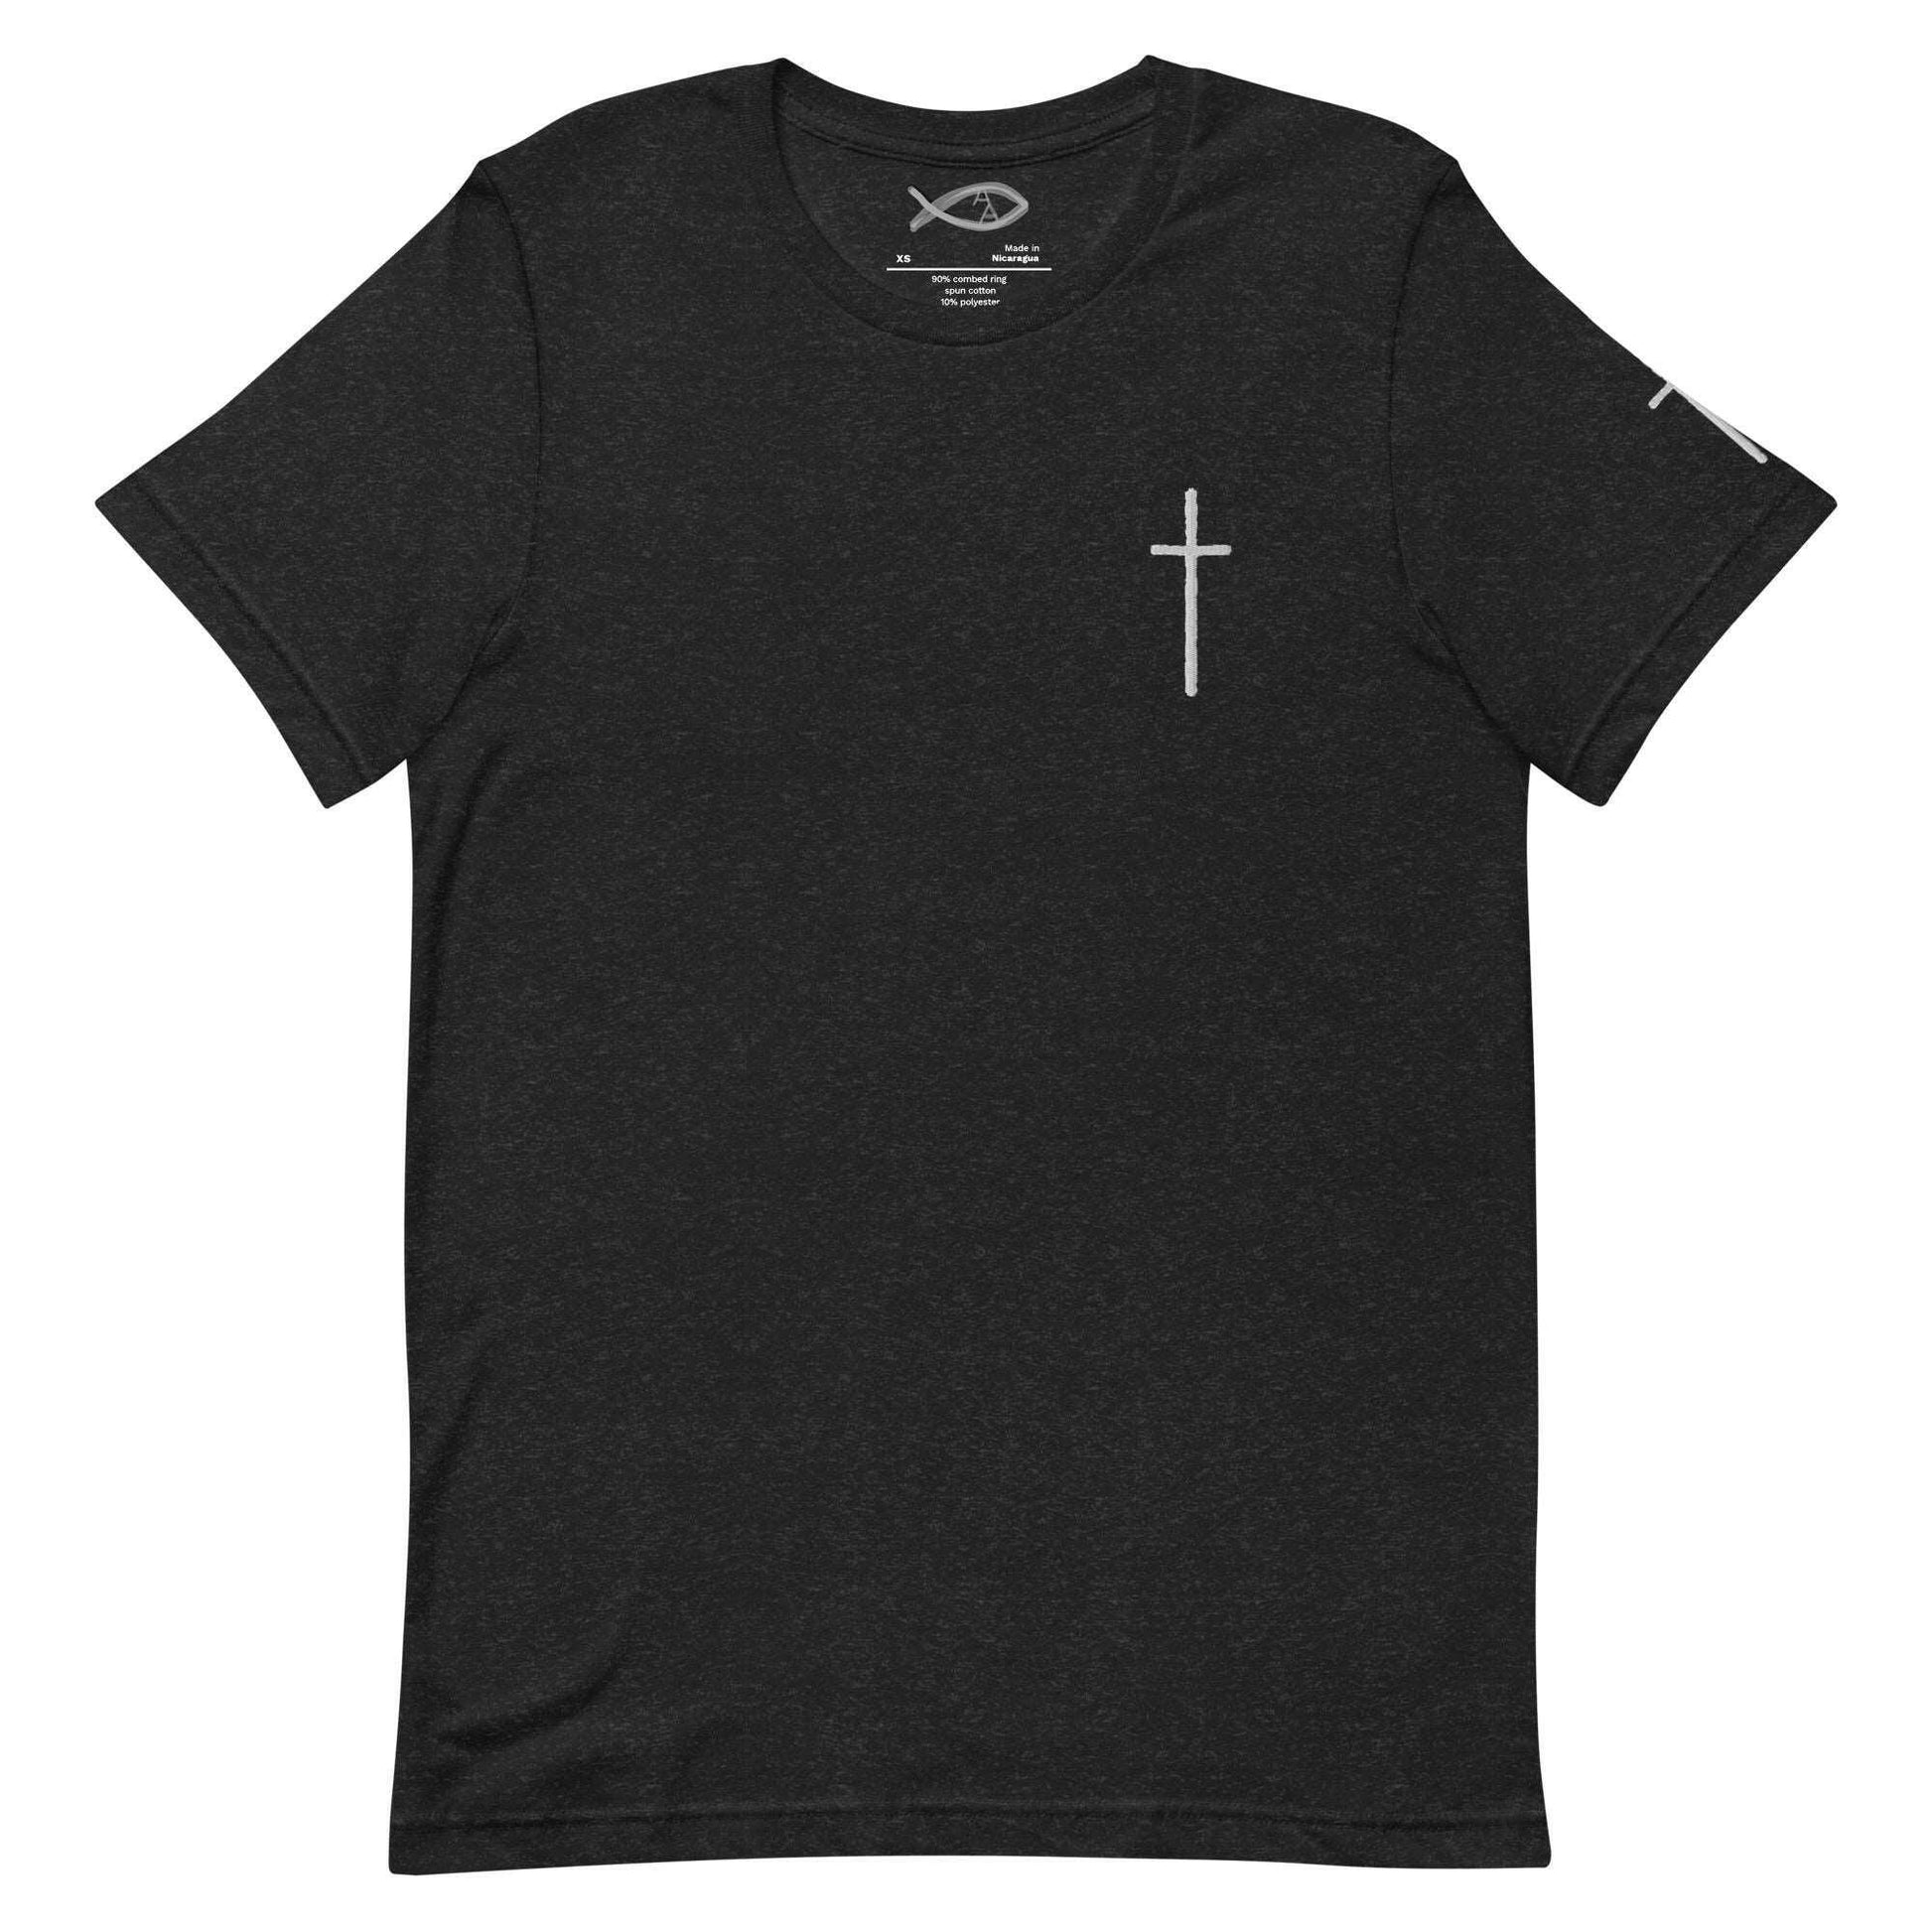 Embroidered Crucifix, Chest & Sleeve - Unisex t-shirt